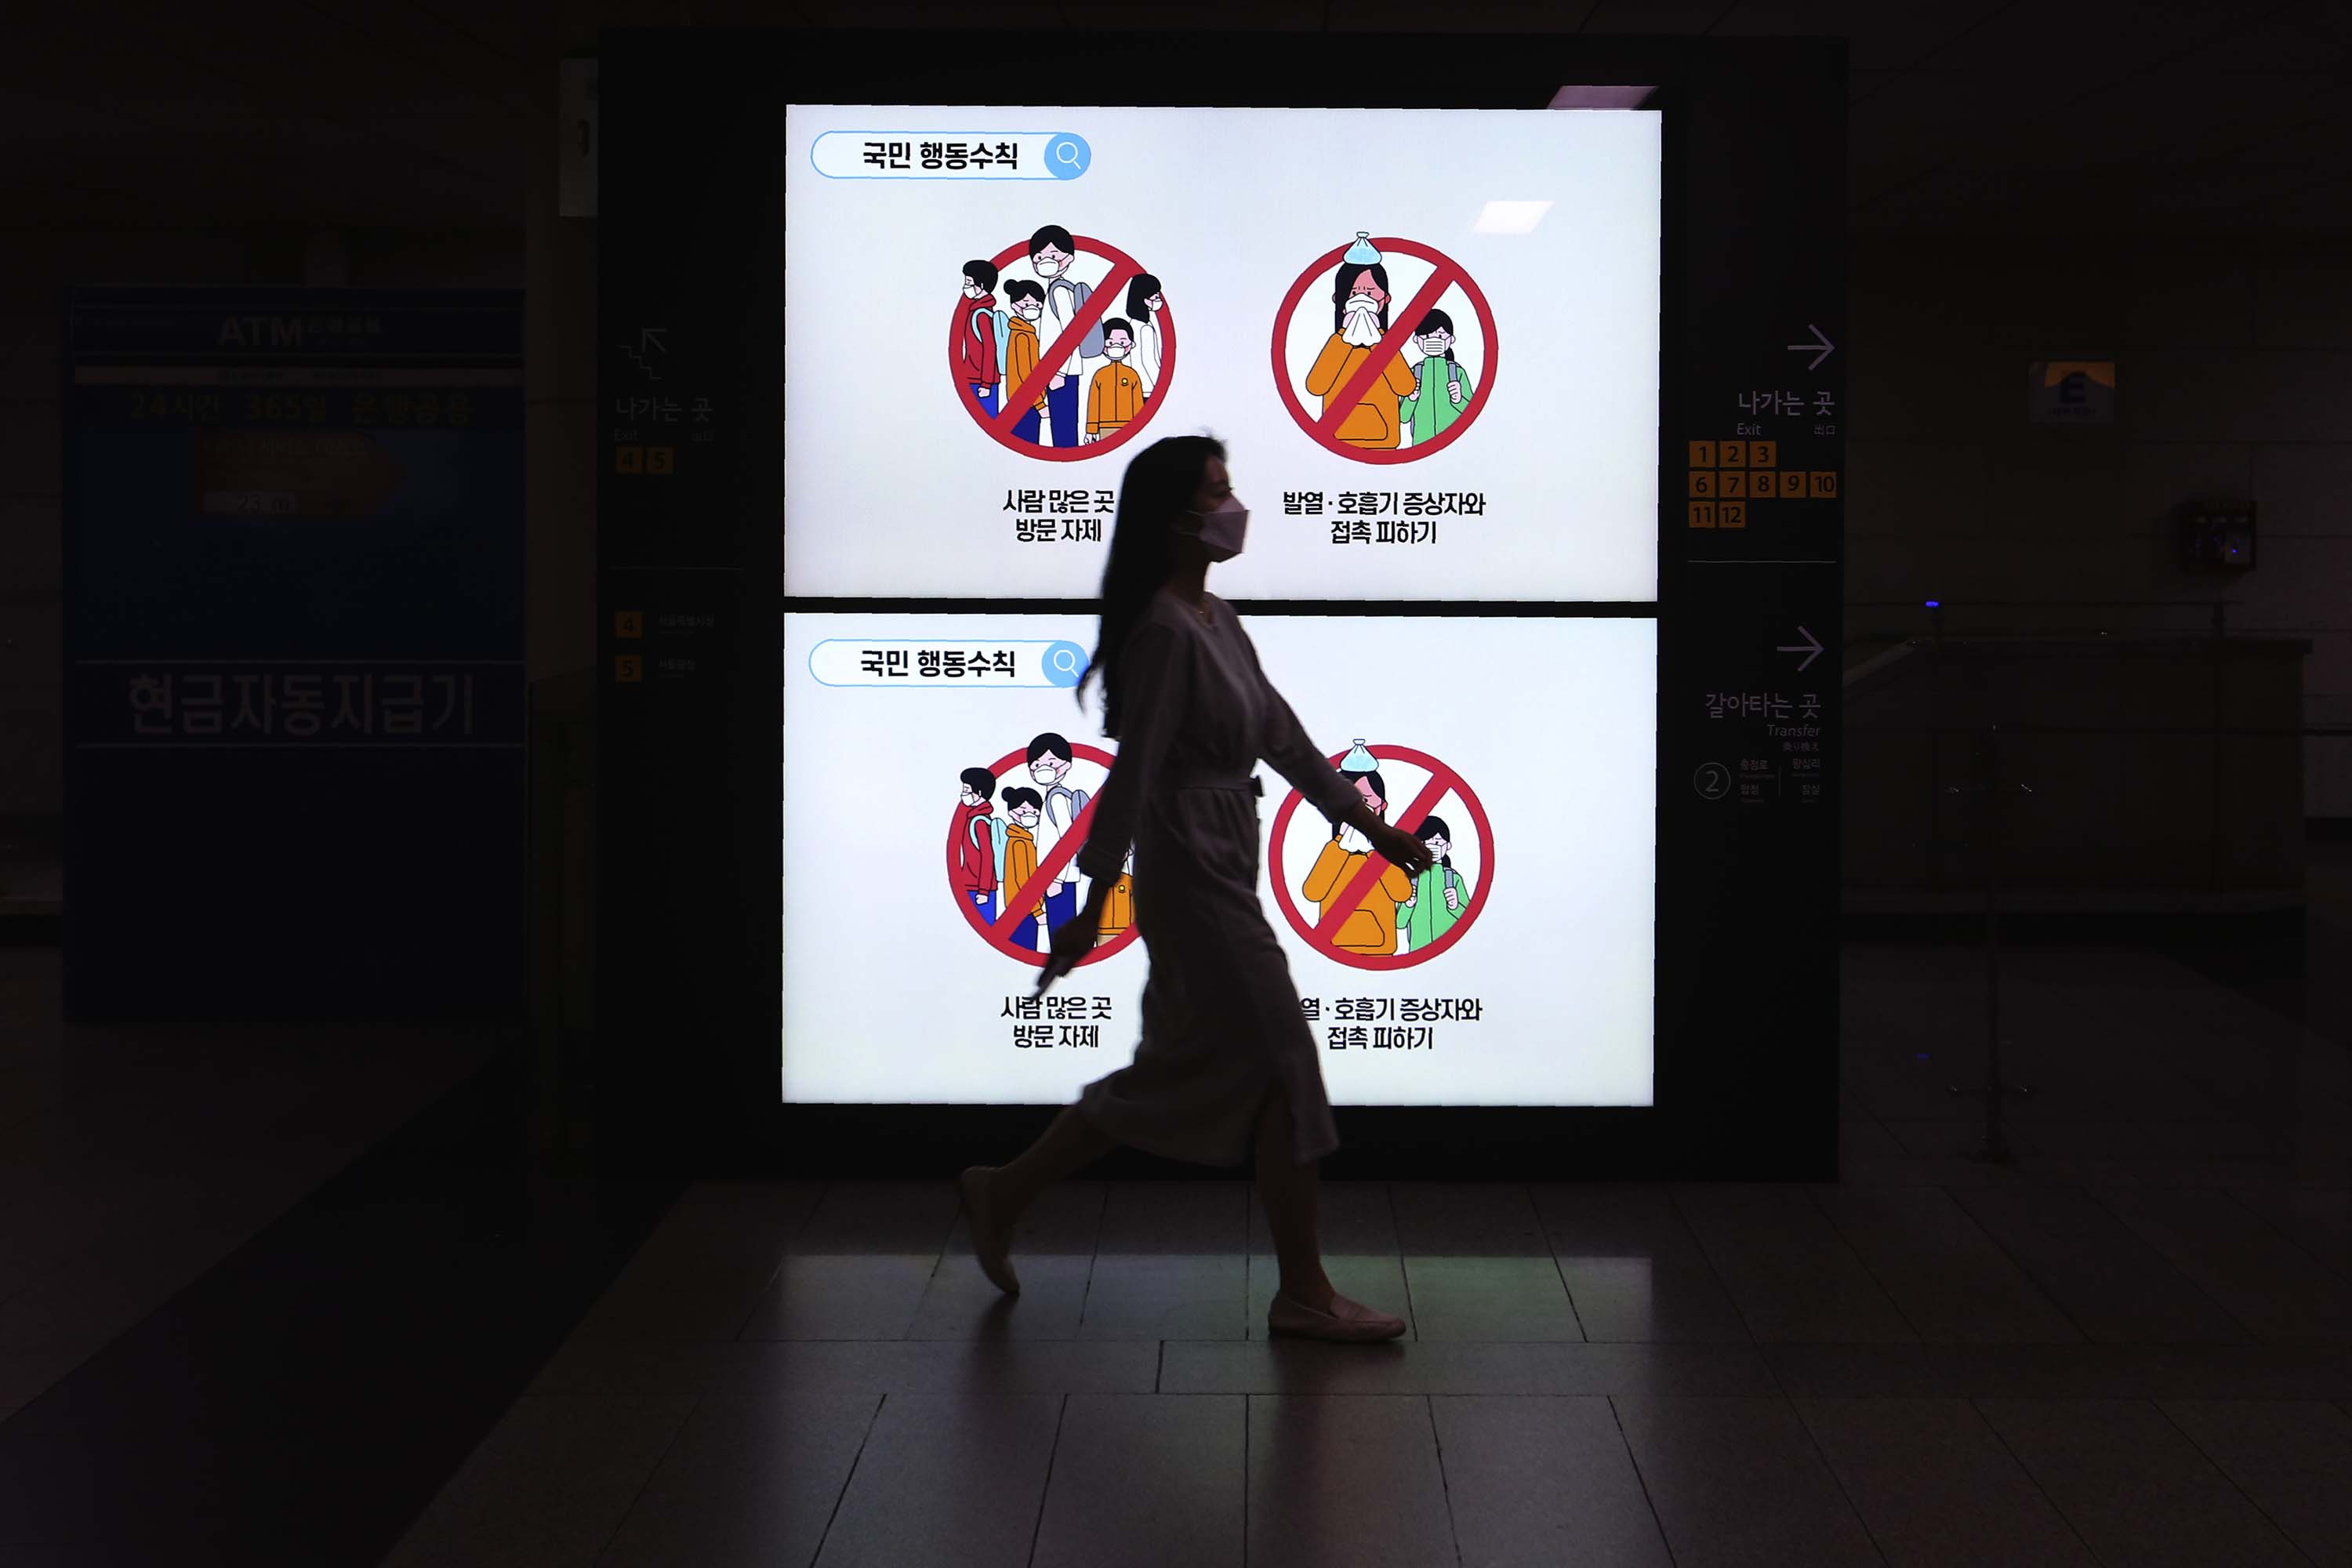 A person wearing a face mask passes by screens showing civil behavior guidelines for protection against the spread of coronavirus at a subway station in Seoul, South Korea, on Thursday, May 28. 